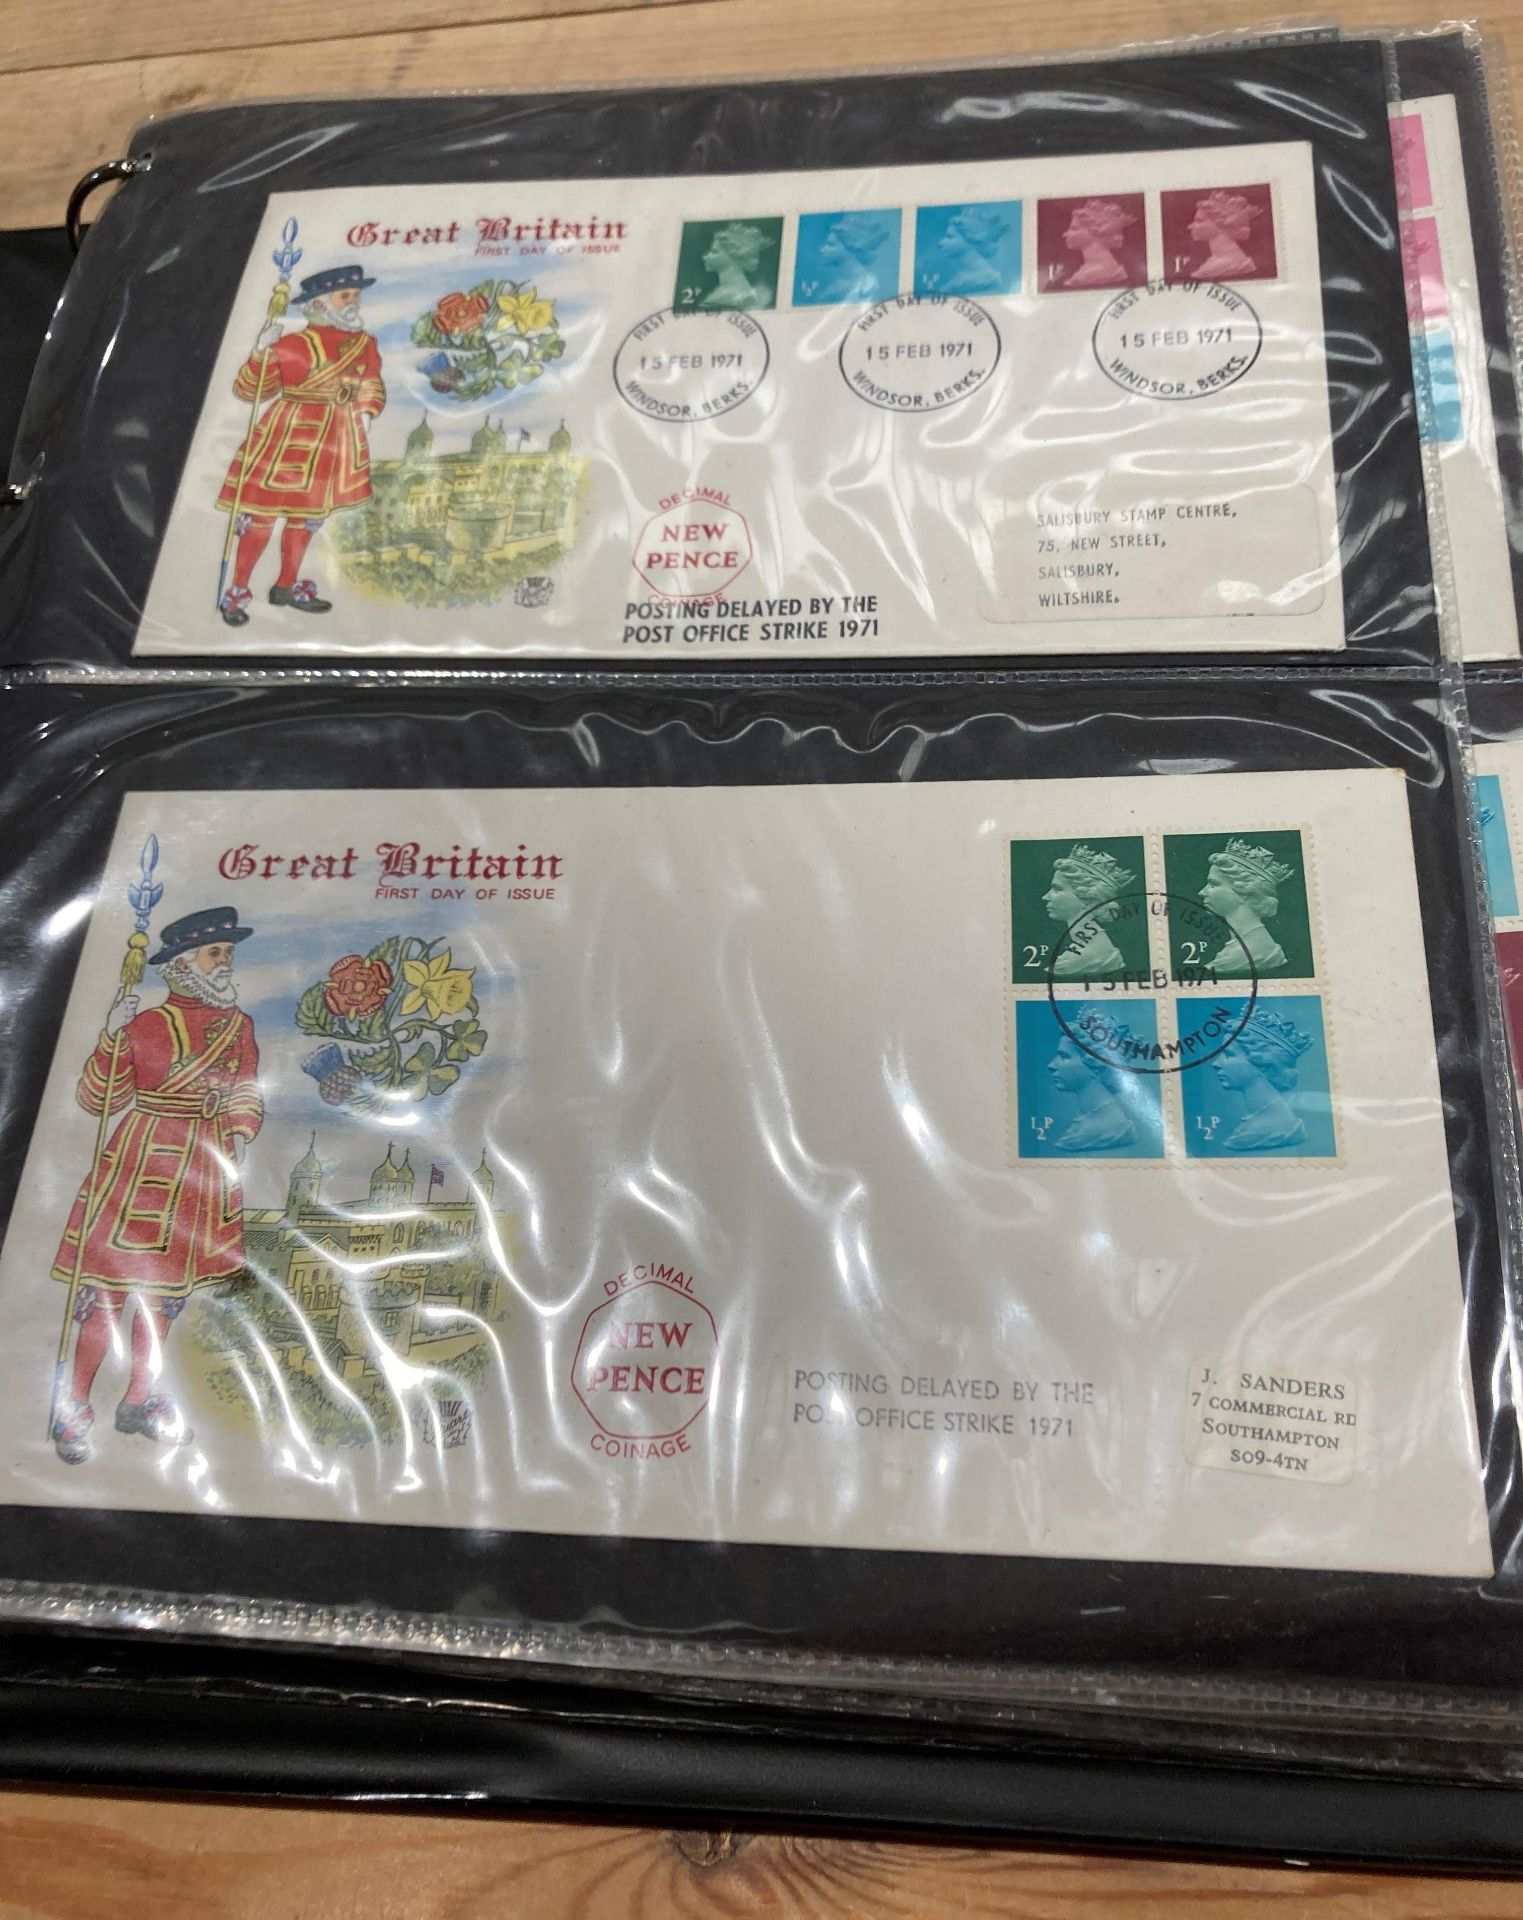 Four albums of Post Office and Royal Mail First Day Covers and one album - the Railway Collection - Image 2 of 17